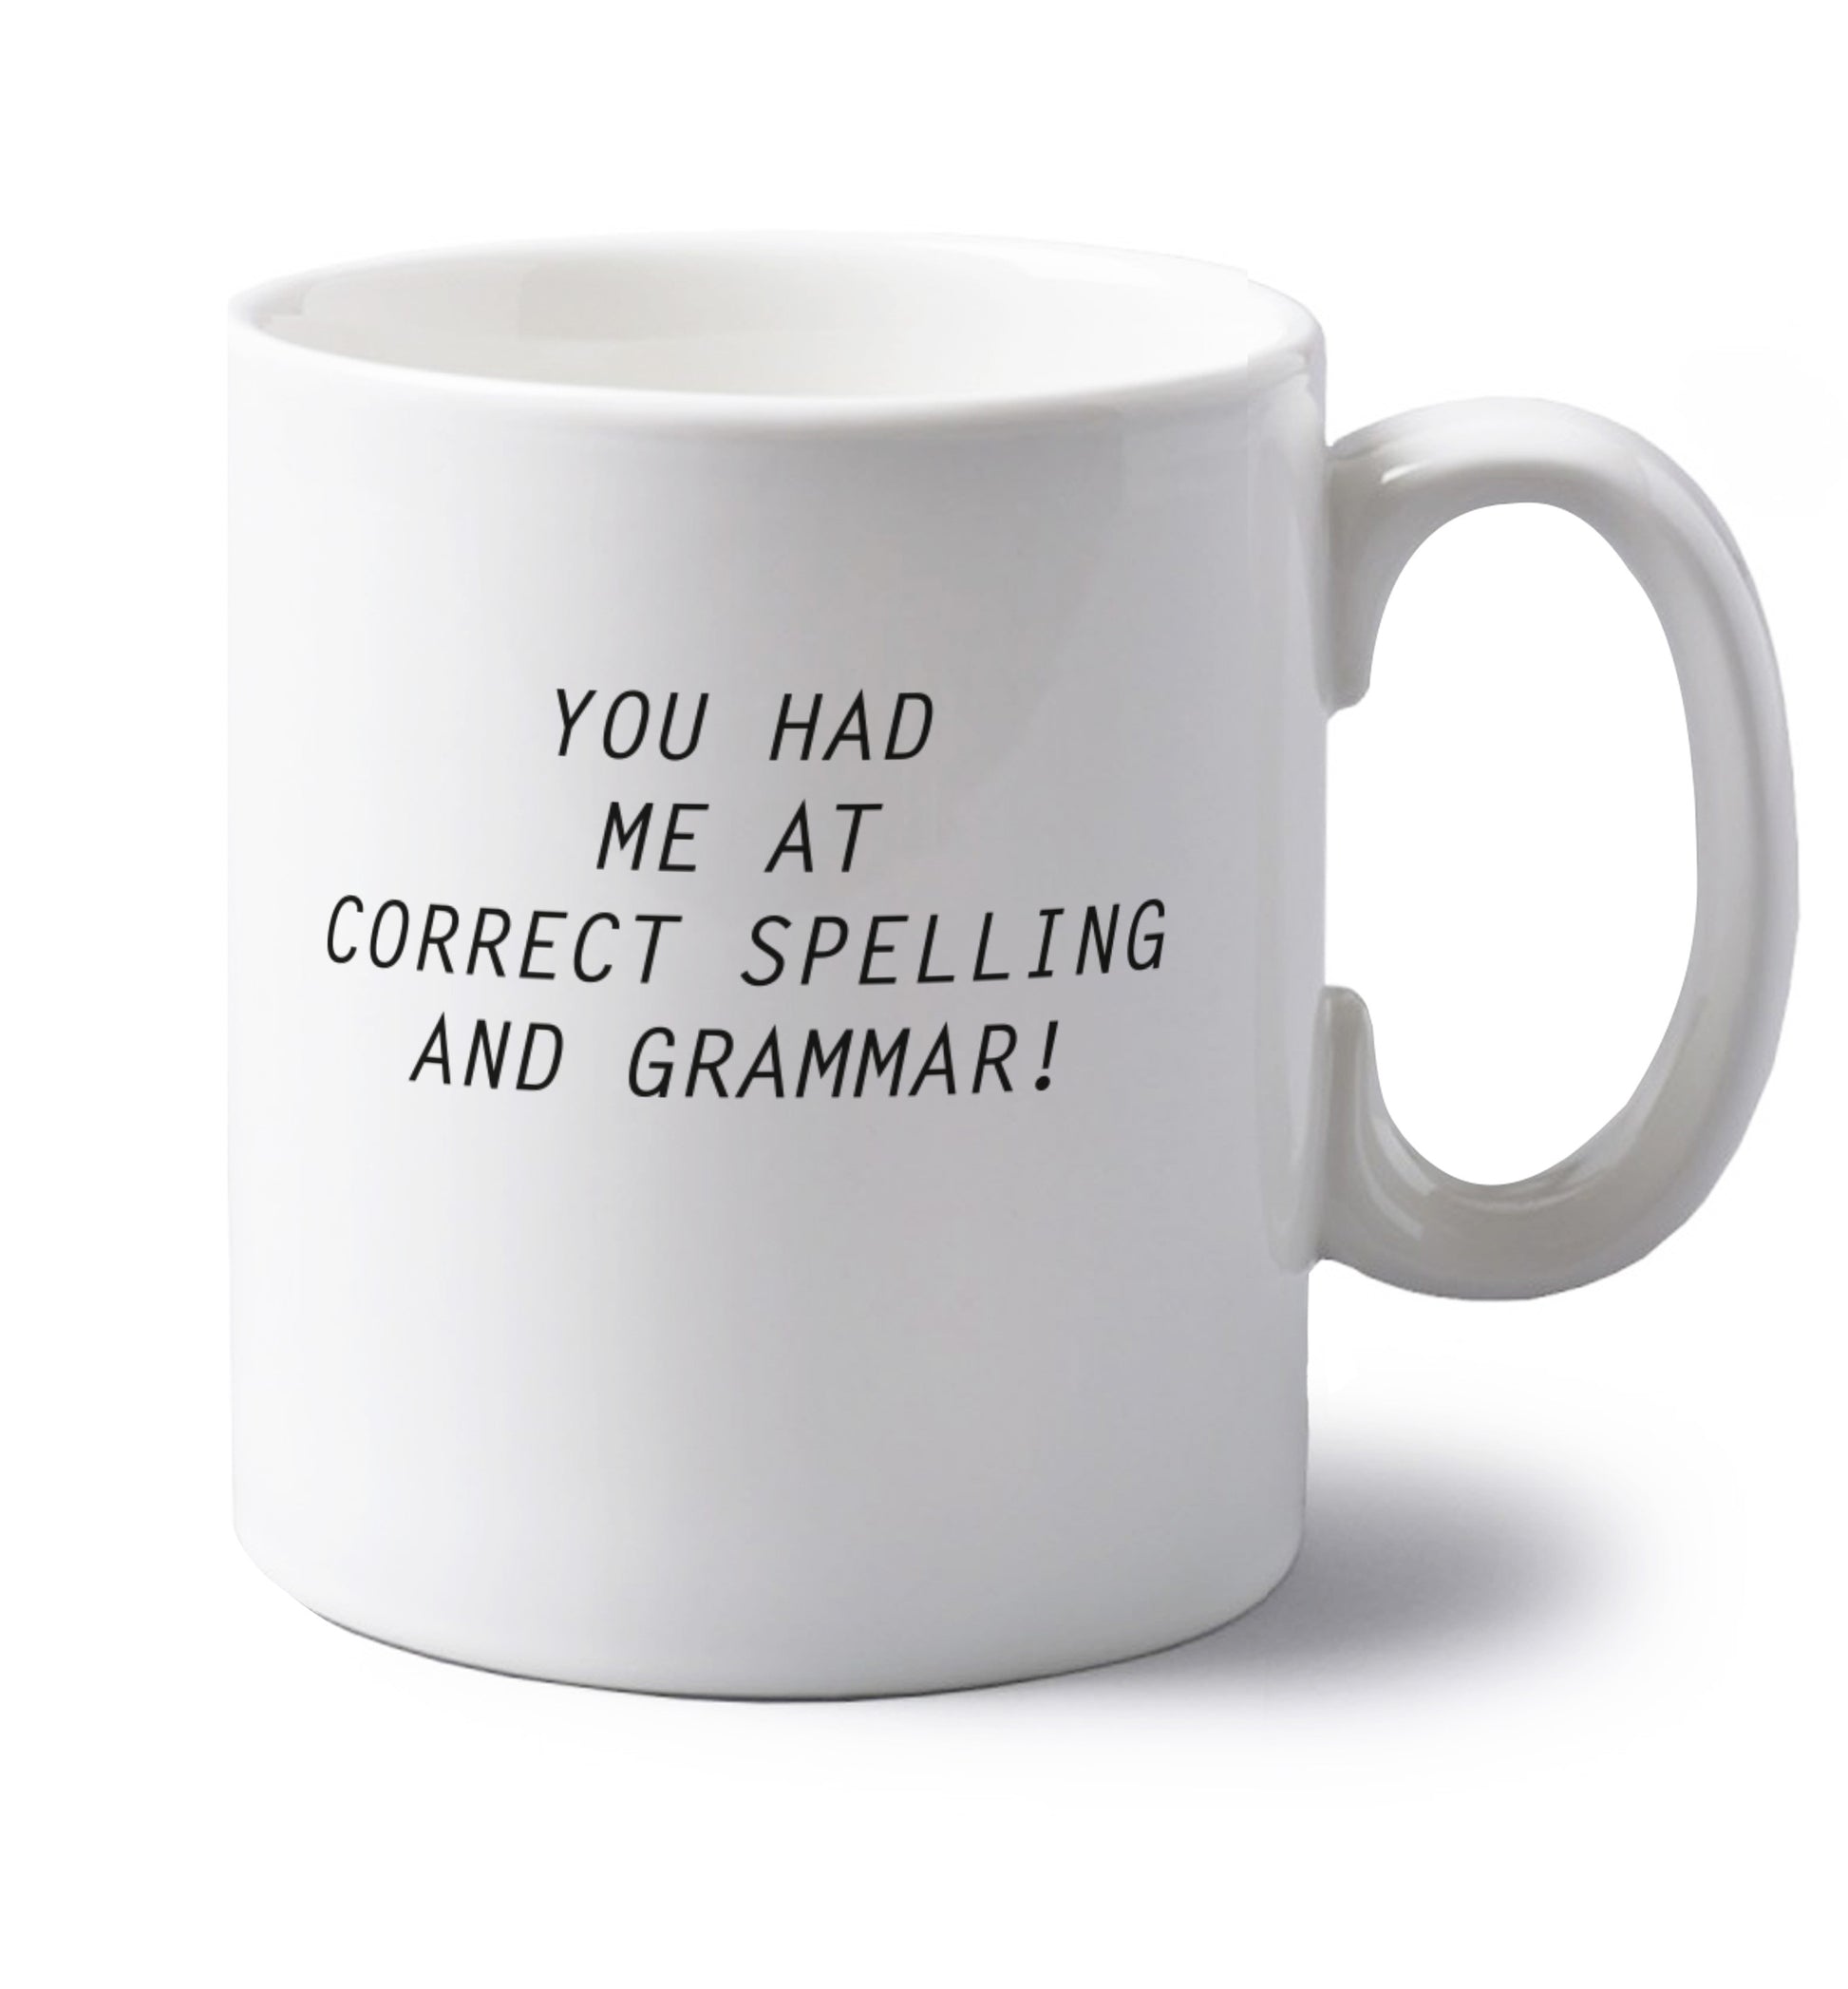 You had me at correct spelling and grammar left handed white ceramic mug 